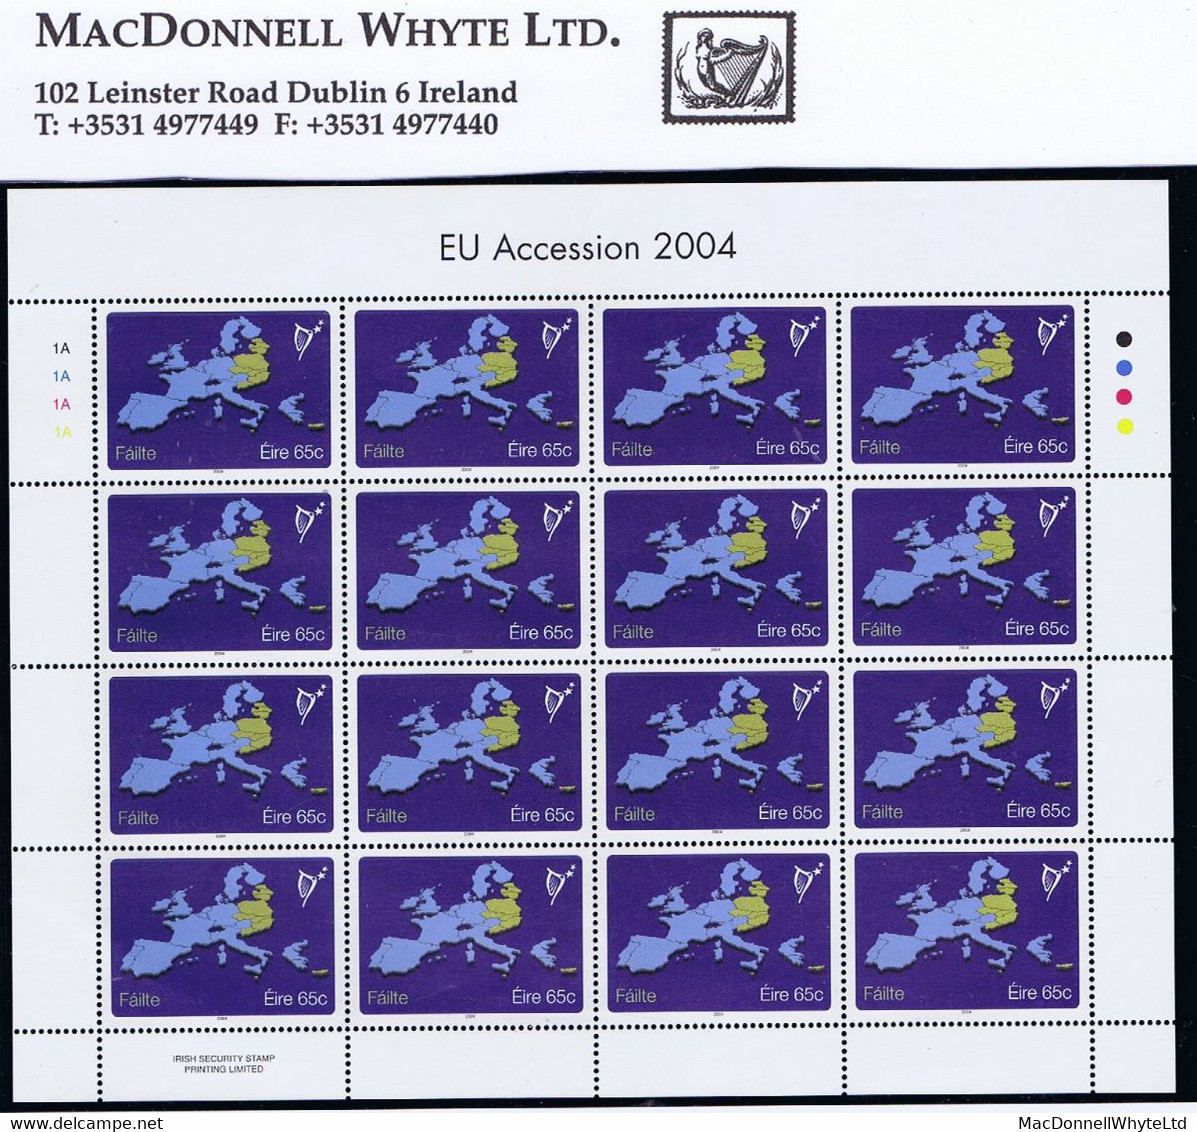 Ireland Cyprus Missing Error Of Design 2004 EU Accession States 65c Sheetlet Of 16 Mint Unmounted Never Hinged - Unused Stamps